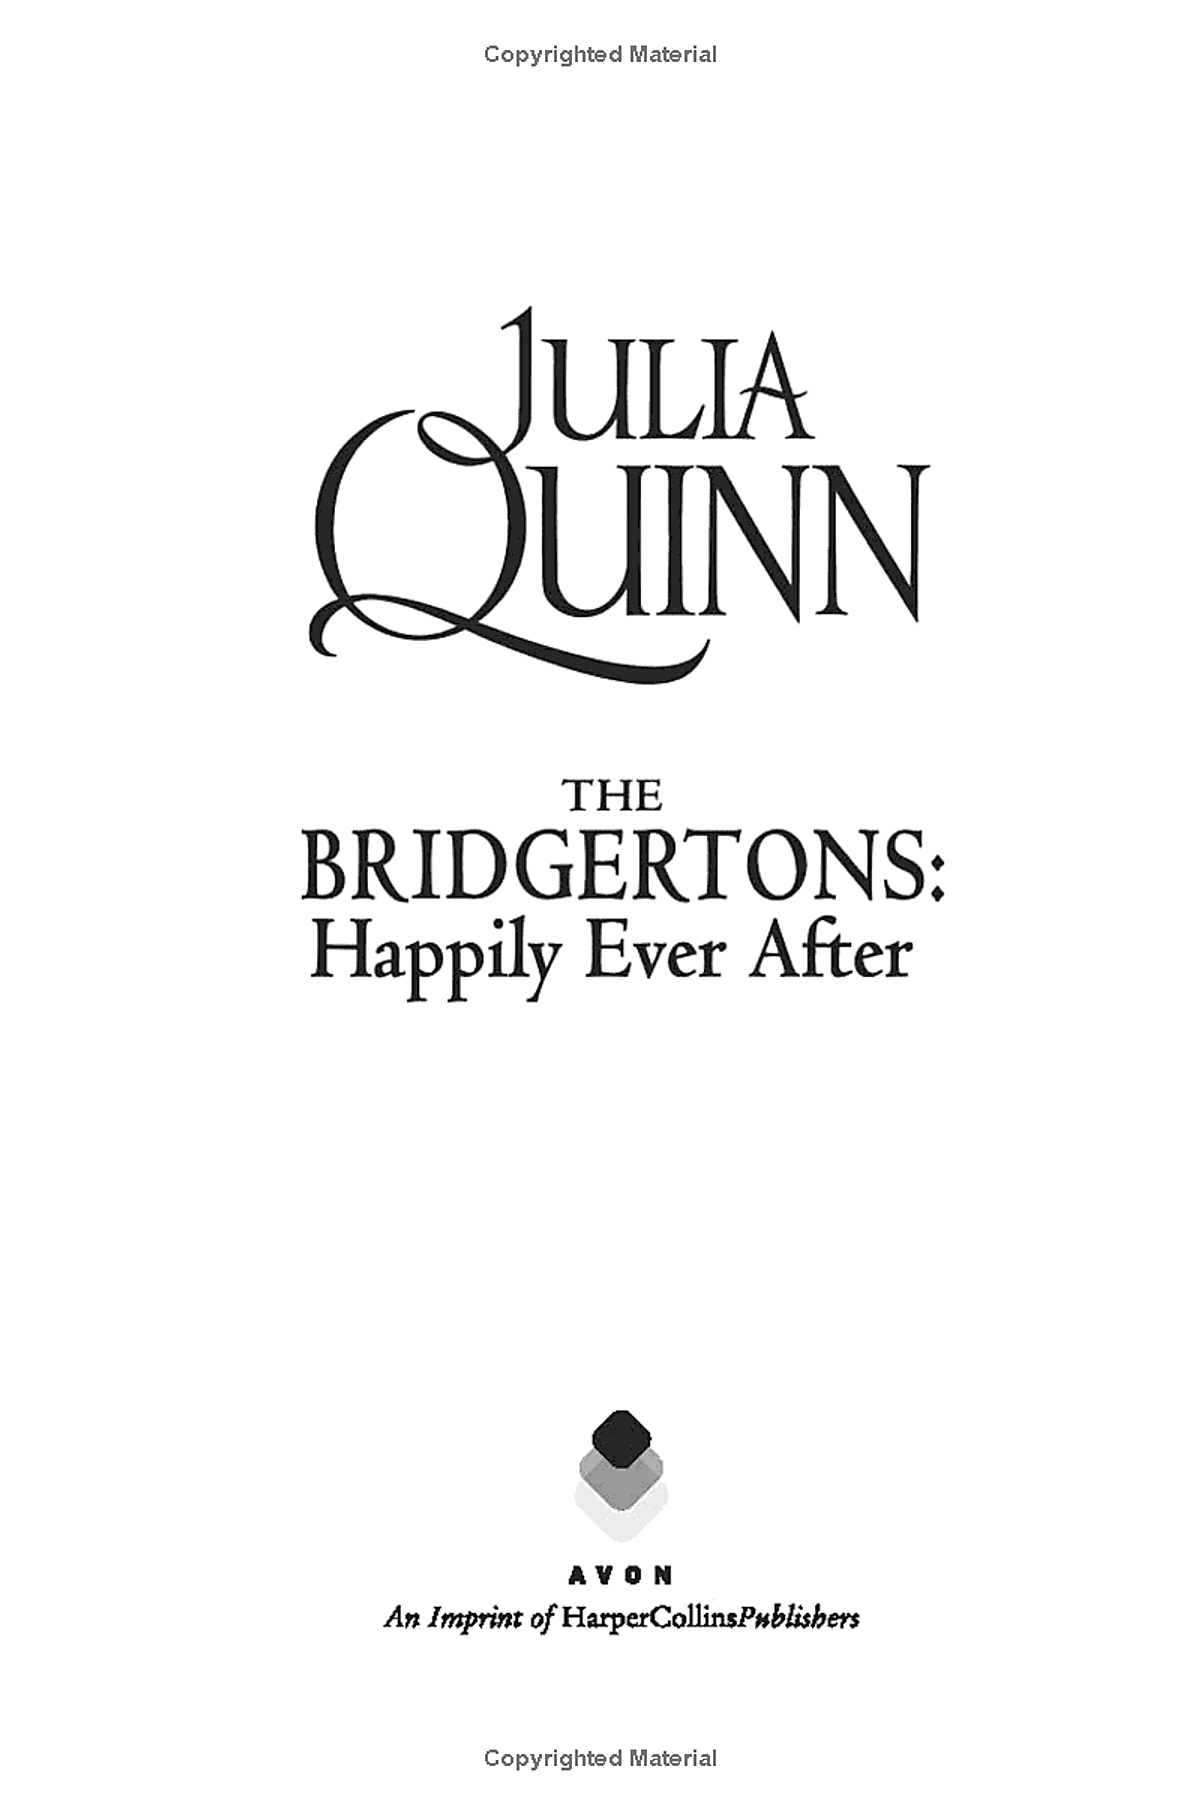 The Bridgertons 9: Happily Ever After